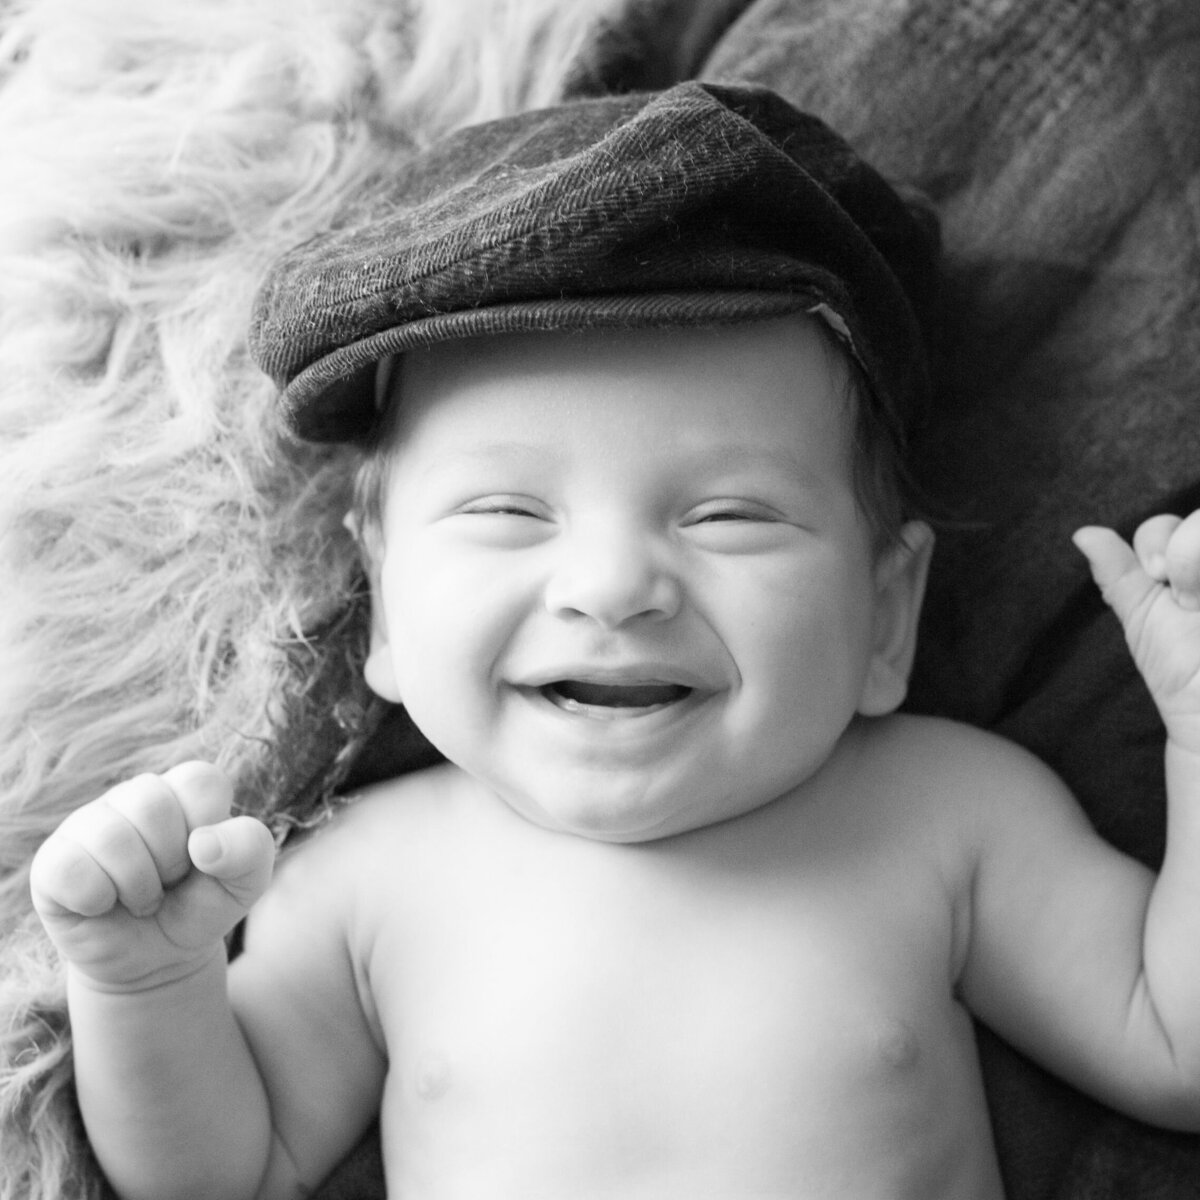 Newborn smiling in a hat. Photographer located in Quitman Texas serving East Texas, Mineola, Winnsboro, Sulpher Springs, Rockwall, Tyler